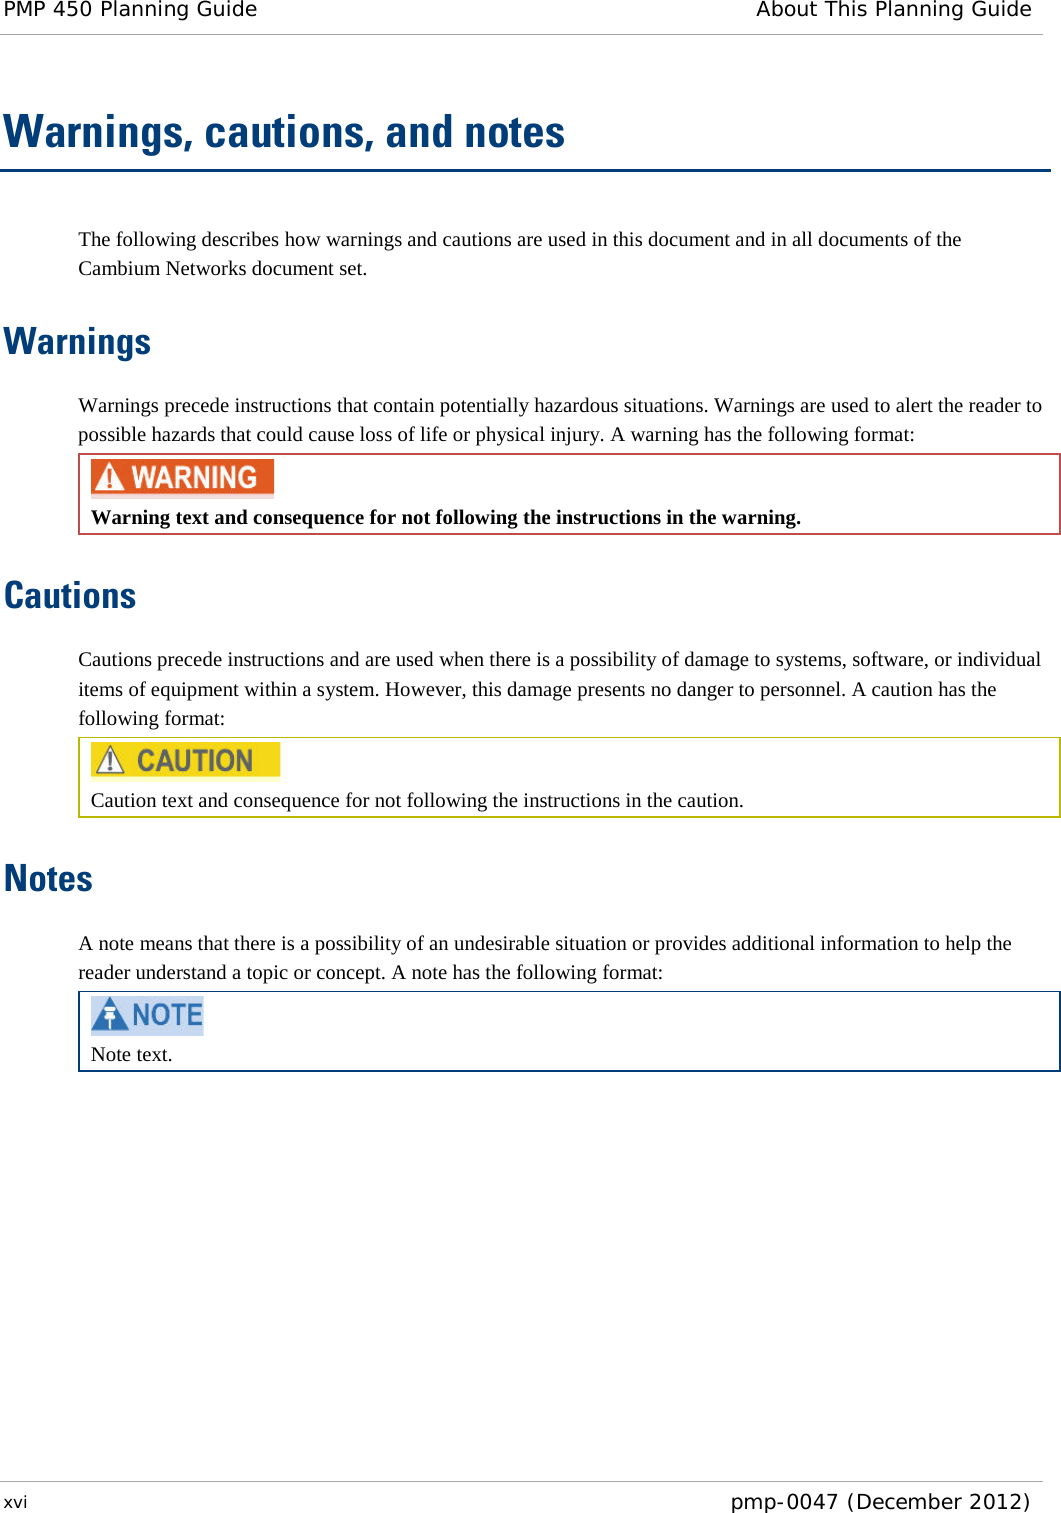 PMP 450 Planning Guide About This Planning Guide  xvi  pmp-0047 (December 2012)  Warnings, cautions, and notes The following describes how warnings and cautions are used in this document and in all documents of the Cambium Networks document set. Warnings Warnings precede instructions that contain potentially hazardous situations. Warnings are used to alert the reader to possible hazards that could cause loss of life or physical injury. A warning has the following format:  Warning text and consequence for not following the instructions in the warning. Cautions Cautions precede instructions and are used when there is a possibility of damage to systems, software, or individual items of equipment within a system. However, this damage presents no danger to personnel. A caution has the following format:  Caution text and consequence for not following the instructions in the caution. Notes A note means that there is a possibility of an undesirable situation or provides additional information to help the reader understand a topic or concept. A note has the following format:  Note text.     